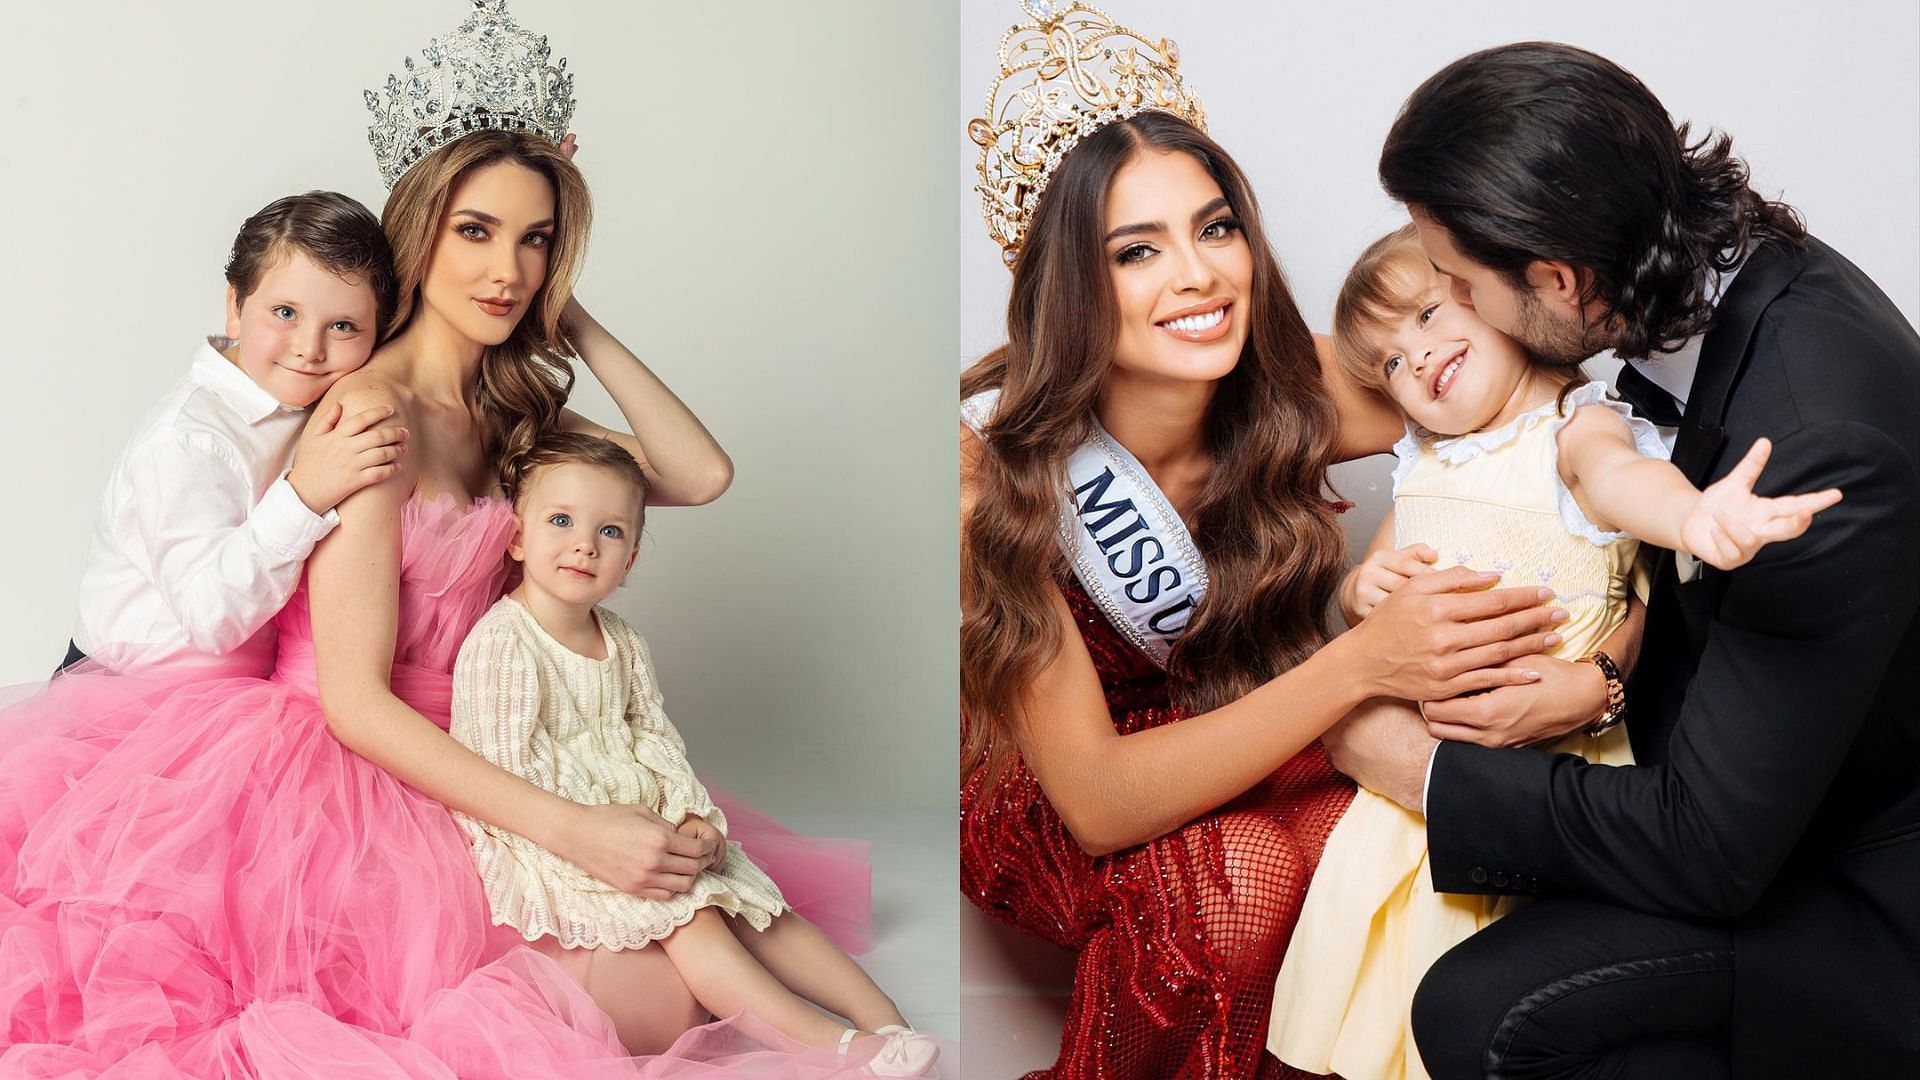 Miss Guatemala and Miss Colombia go down in history. (Images via Instagram/@michellecohnb and @camiavellam)